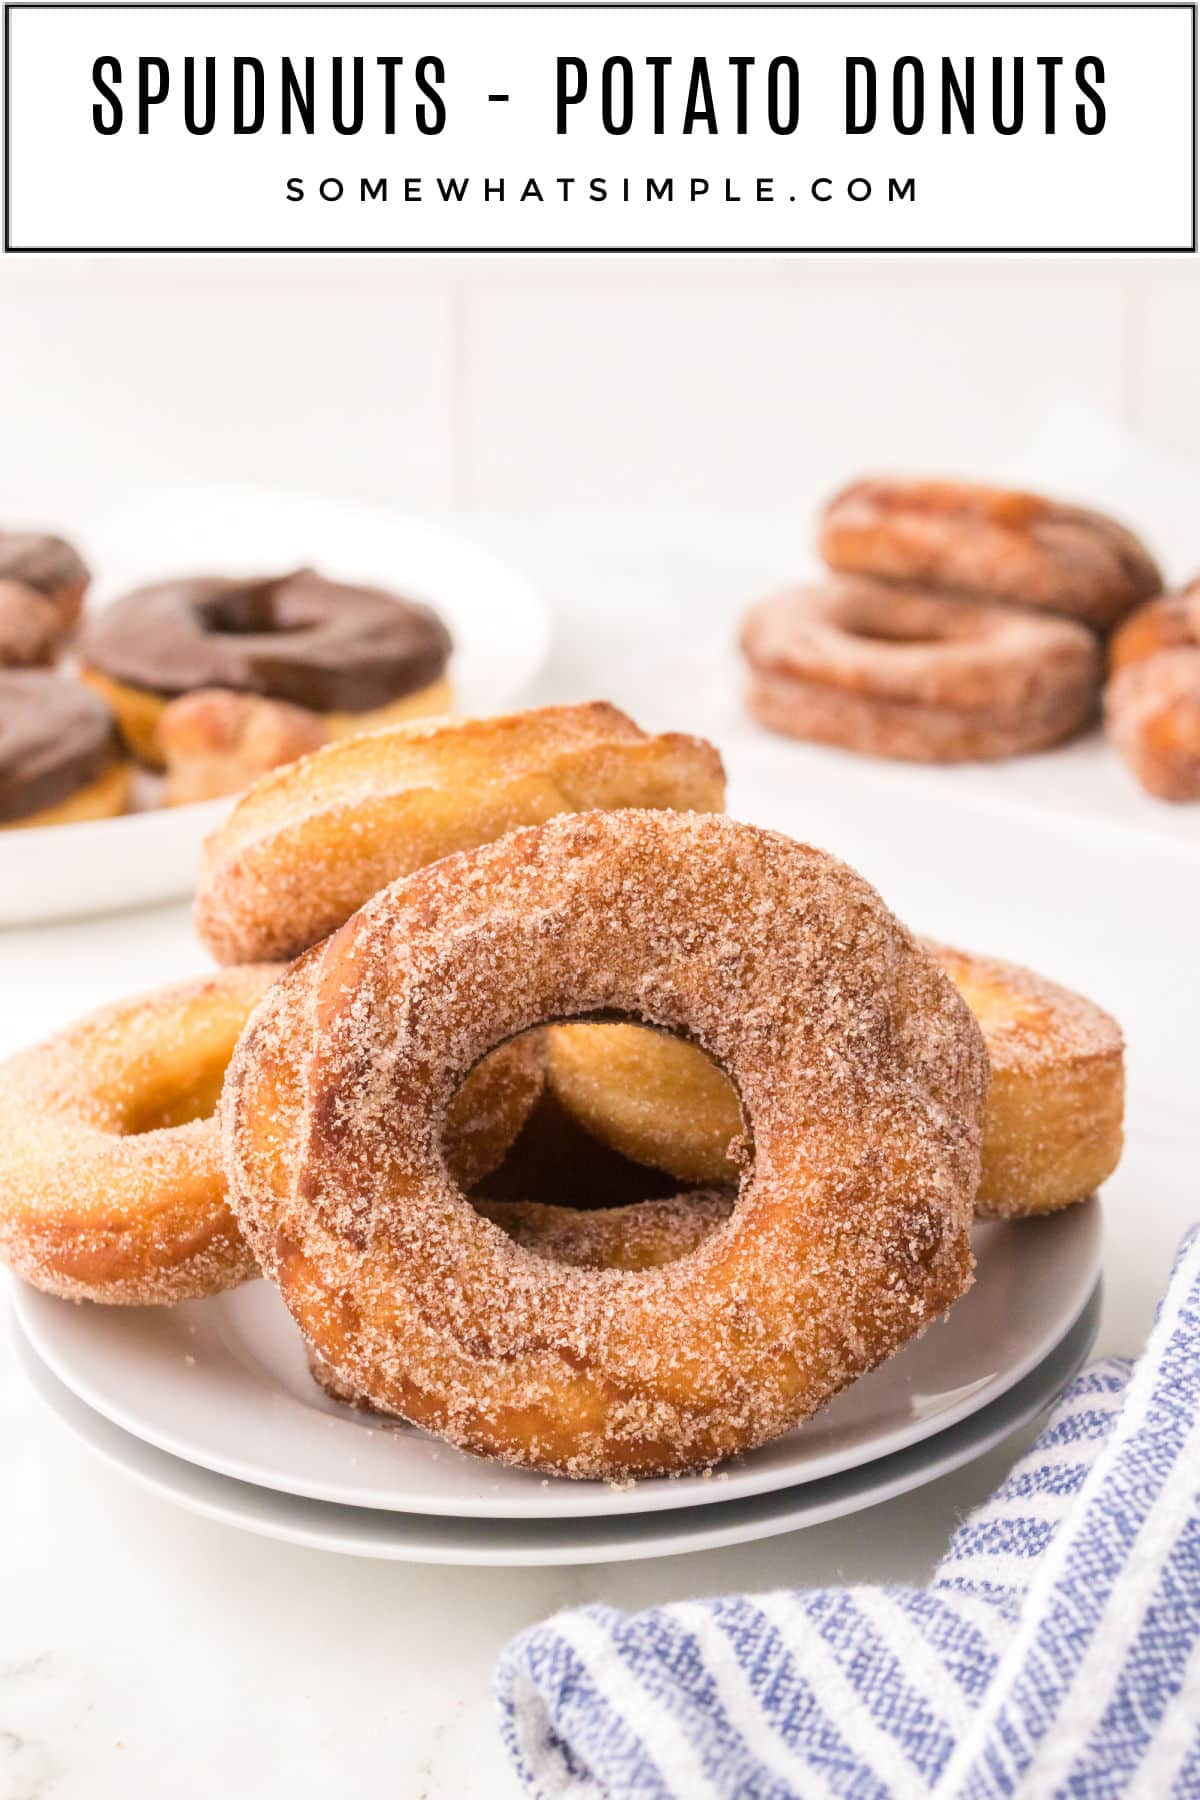 Spudnuts are deep-fried pastries made out of mashed potatoes and covered in coarse sugar or a delicious glazed frosting. They're simple to make and totally delicious! via @somewhatsimple